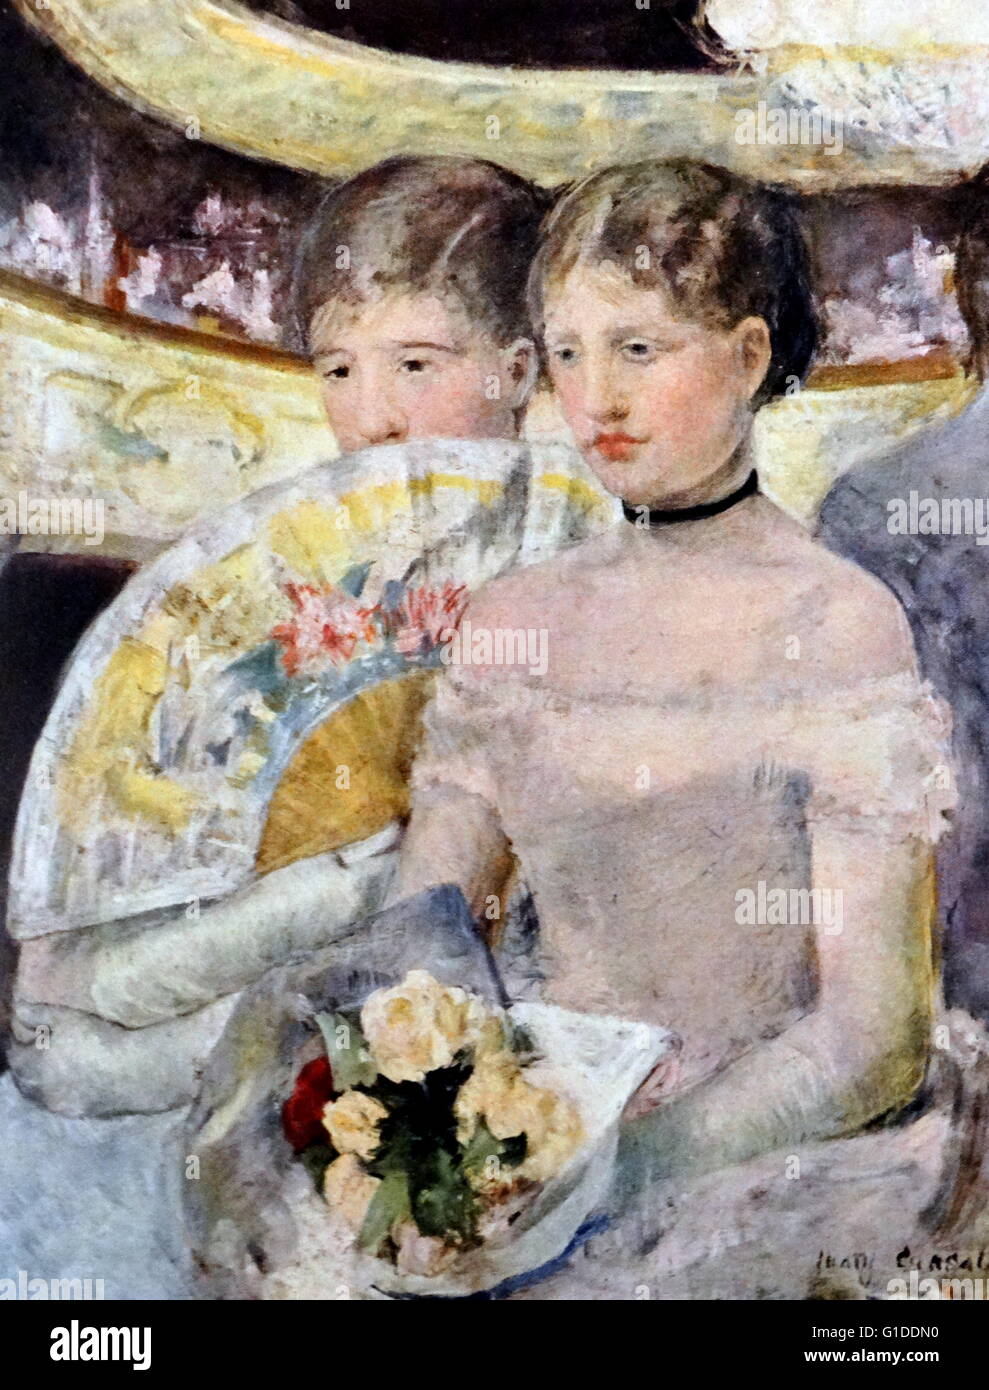 Painting titled 'The Lodge' by Mary Cassatt (1844-1926) n American painter and printmaker. Dated 19th Century Stock Photo